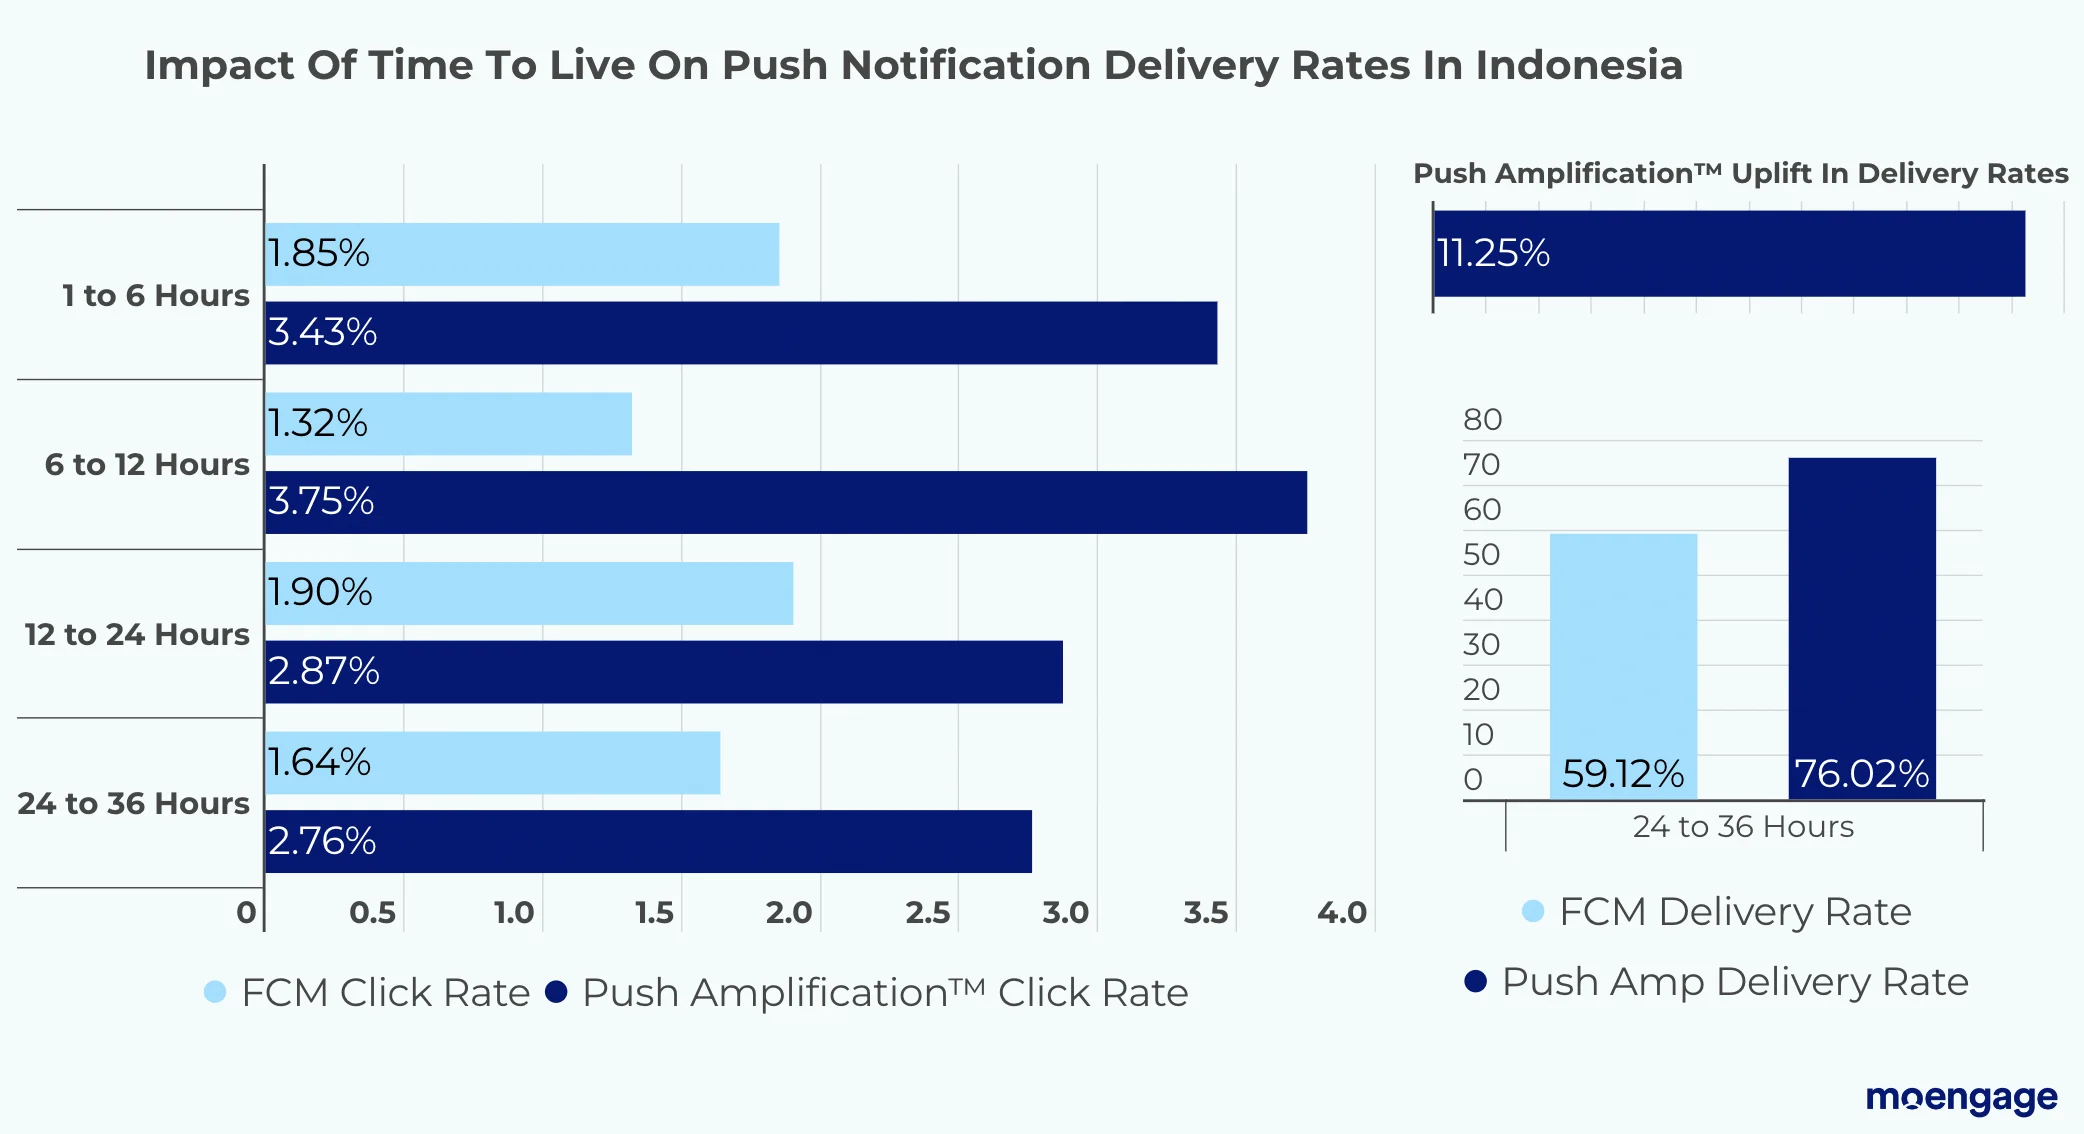 Impact of time to live on push notification delivery rate in Indonesia